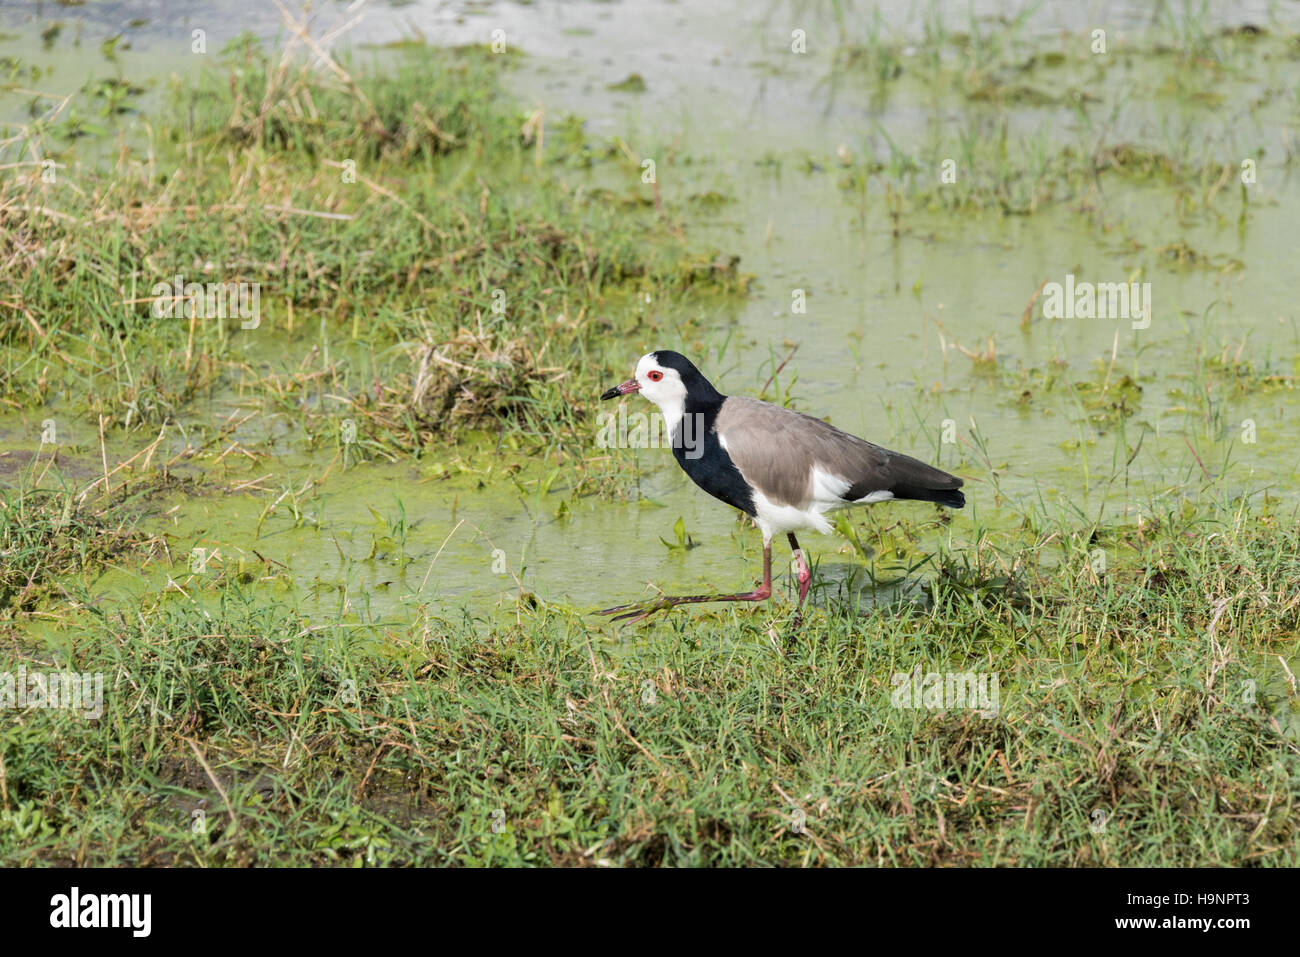 A Long-toed Plover walking in a marsh Stock Photo